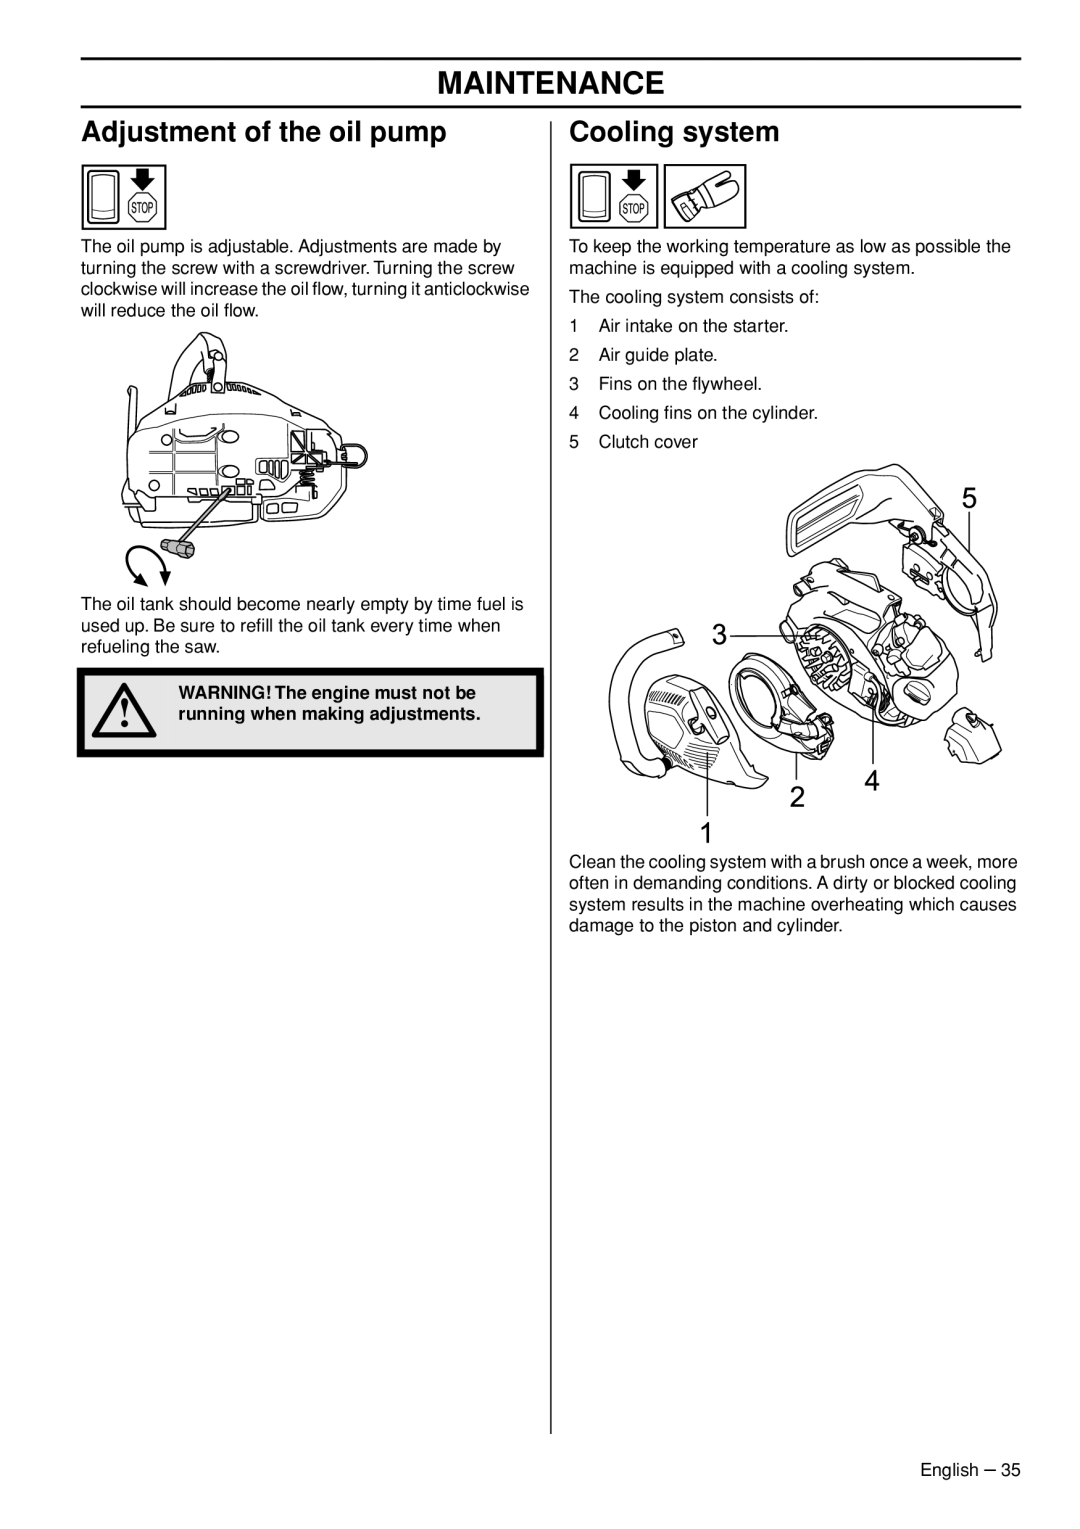 Husqvarna T435 manual Adjustment of the oil pump, Cooling system, WARNING! The engine must not be, Maintenance 